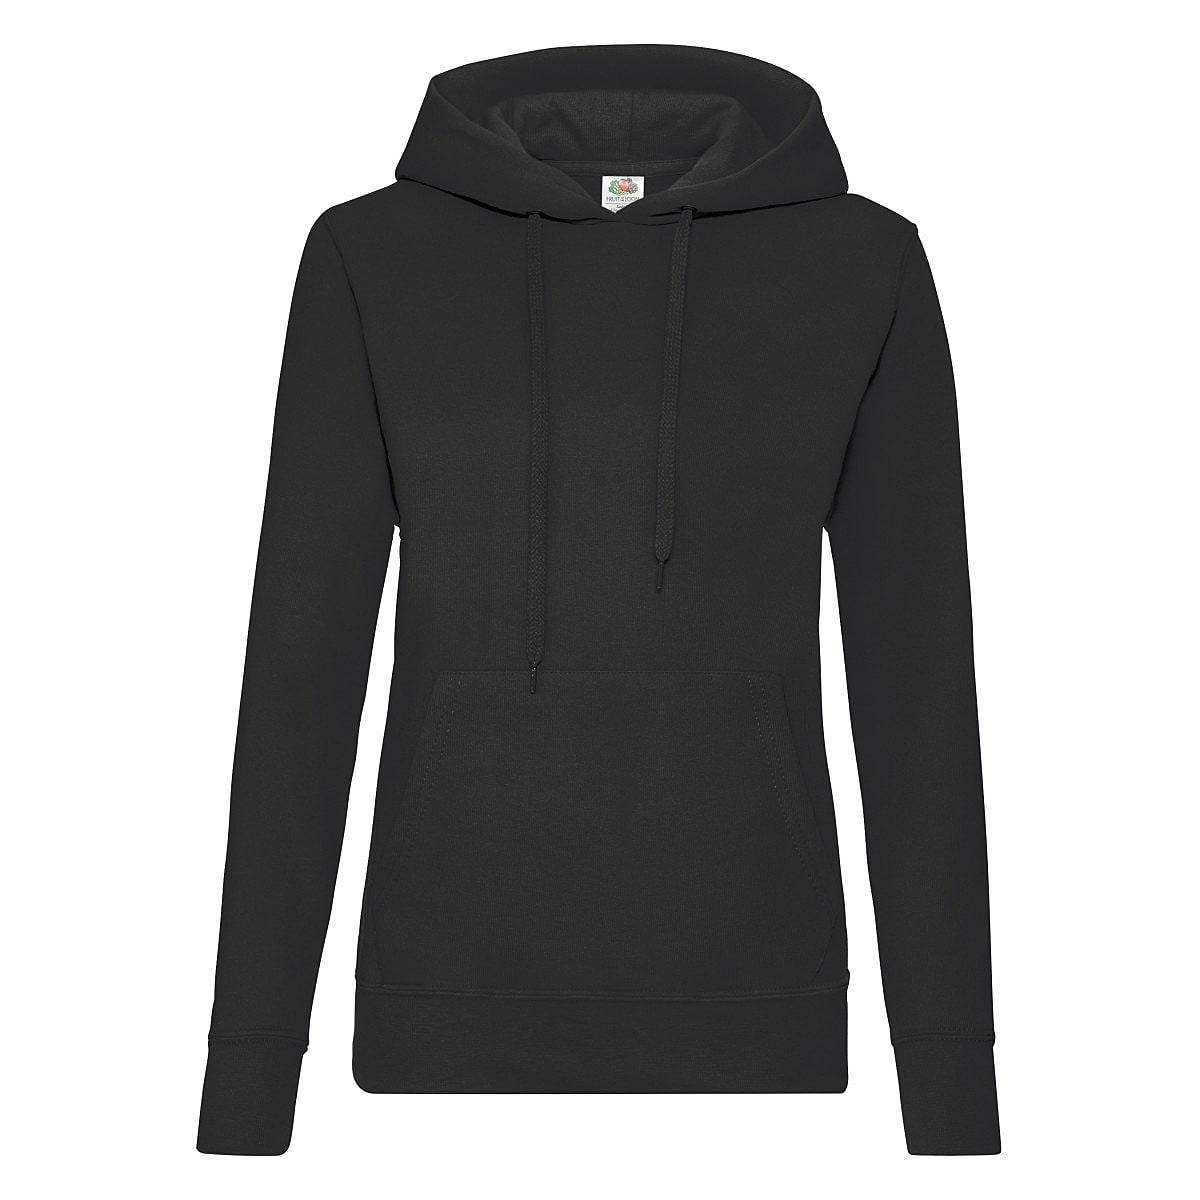 Fruit Of The Loom Lady-Fit Classic Hoodie in Black (Product Code: 62038)